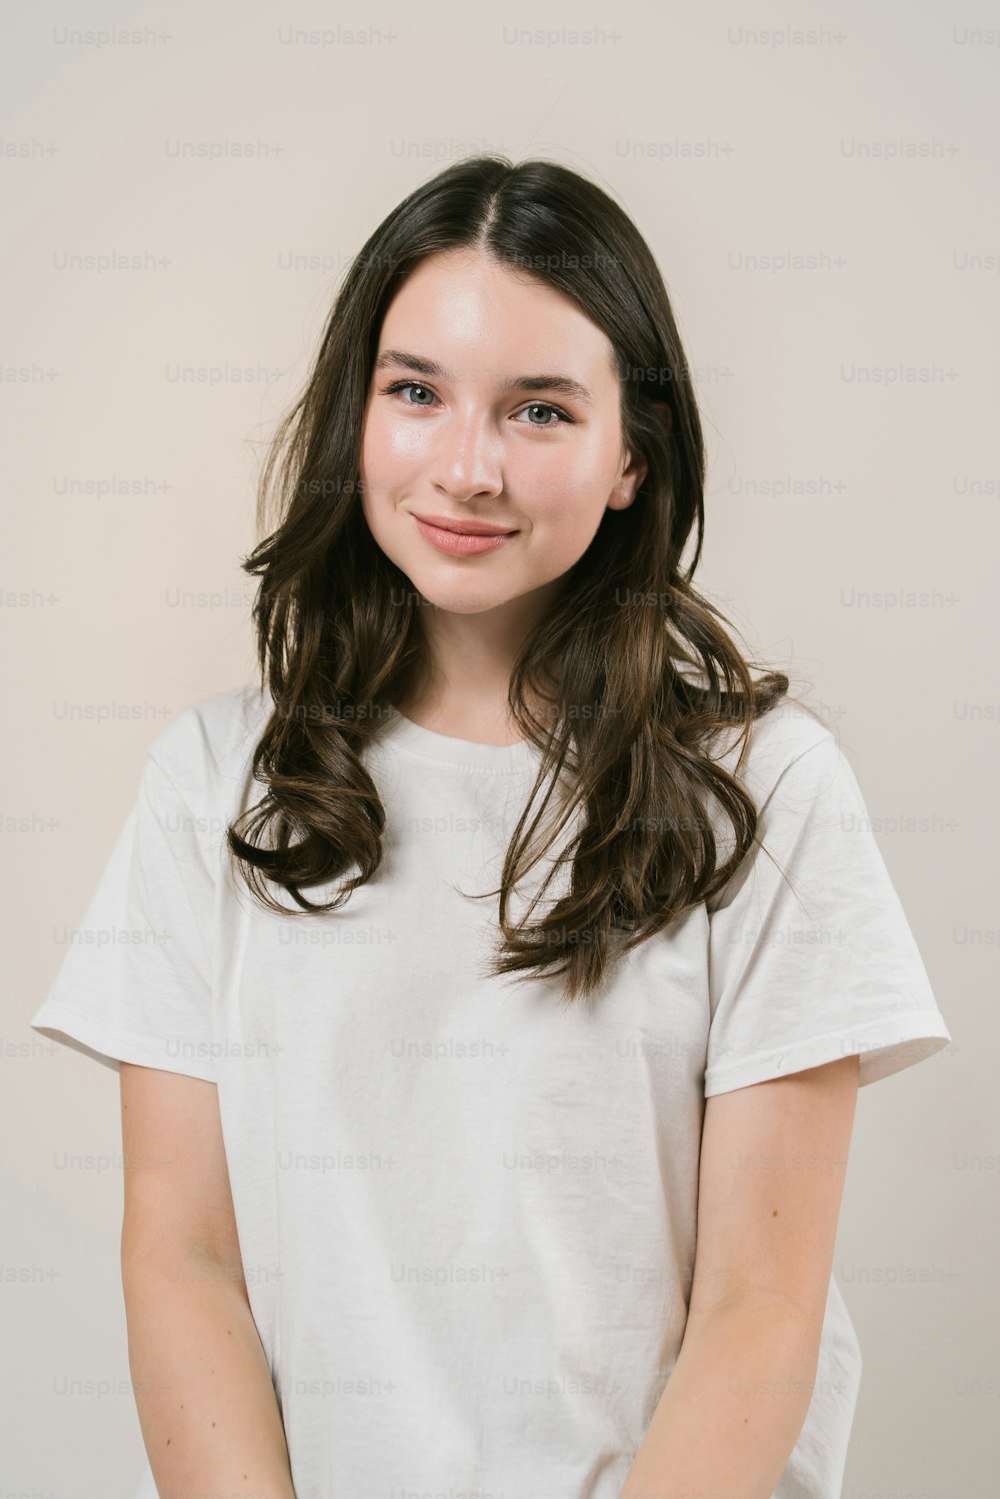 a young girl with long hair wearing a white t - shirt